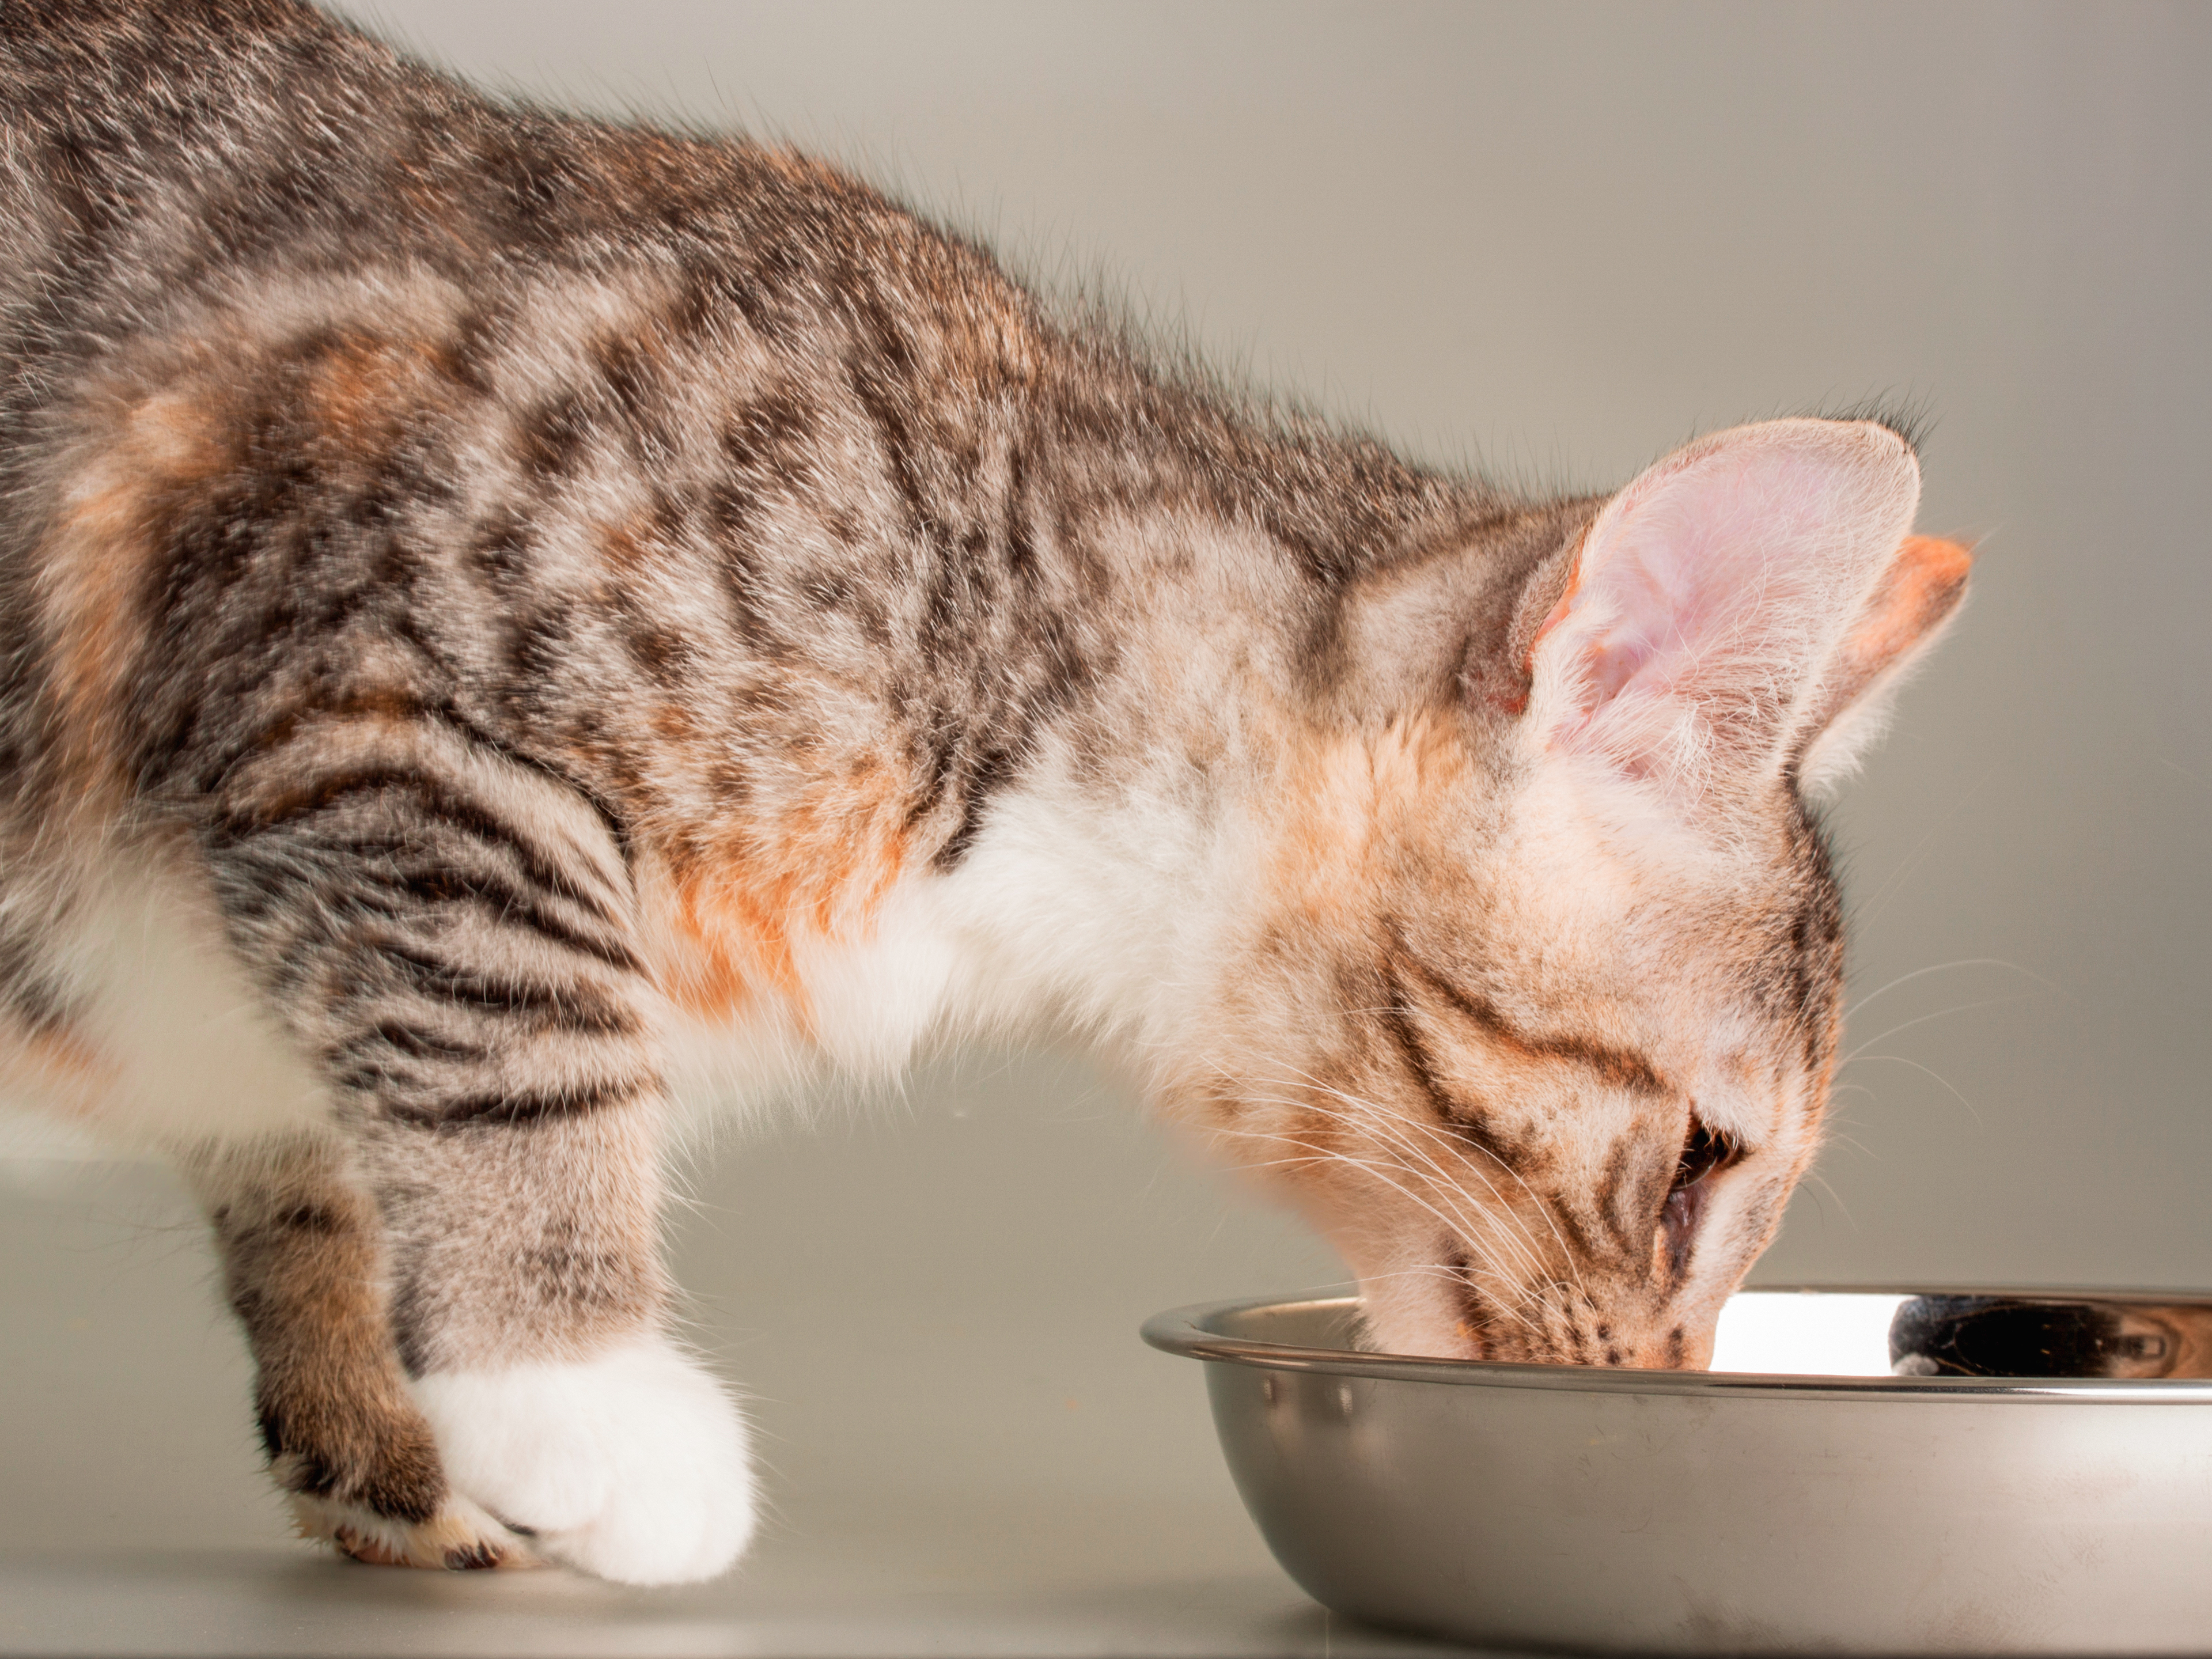 Tabby kitten standing indoors eating from a stainless steel feeding bowl